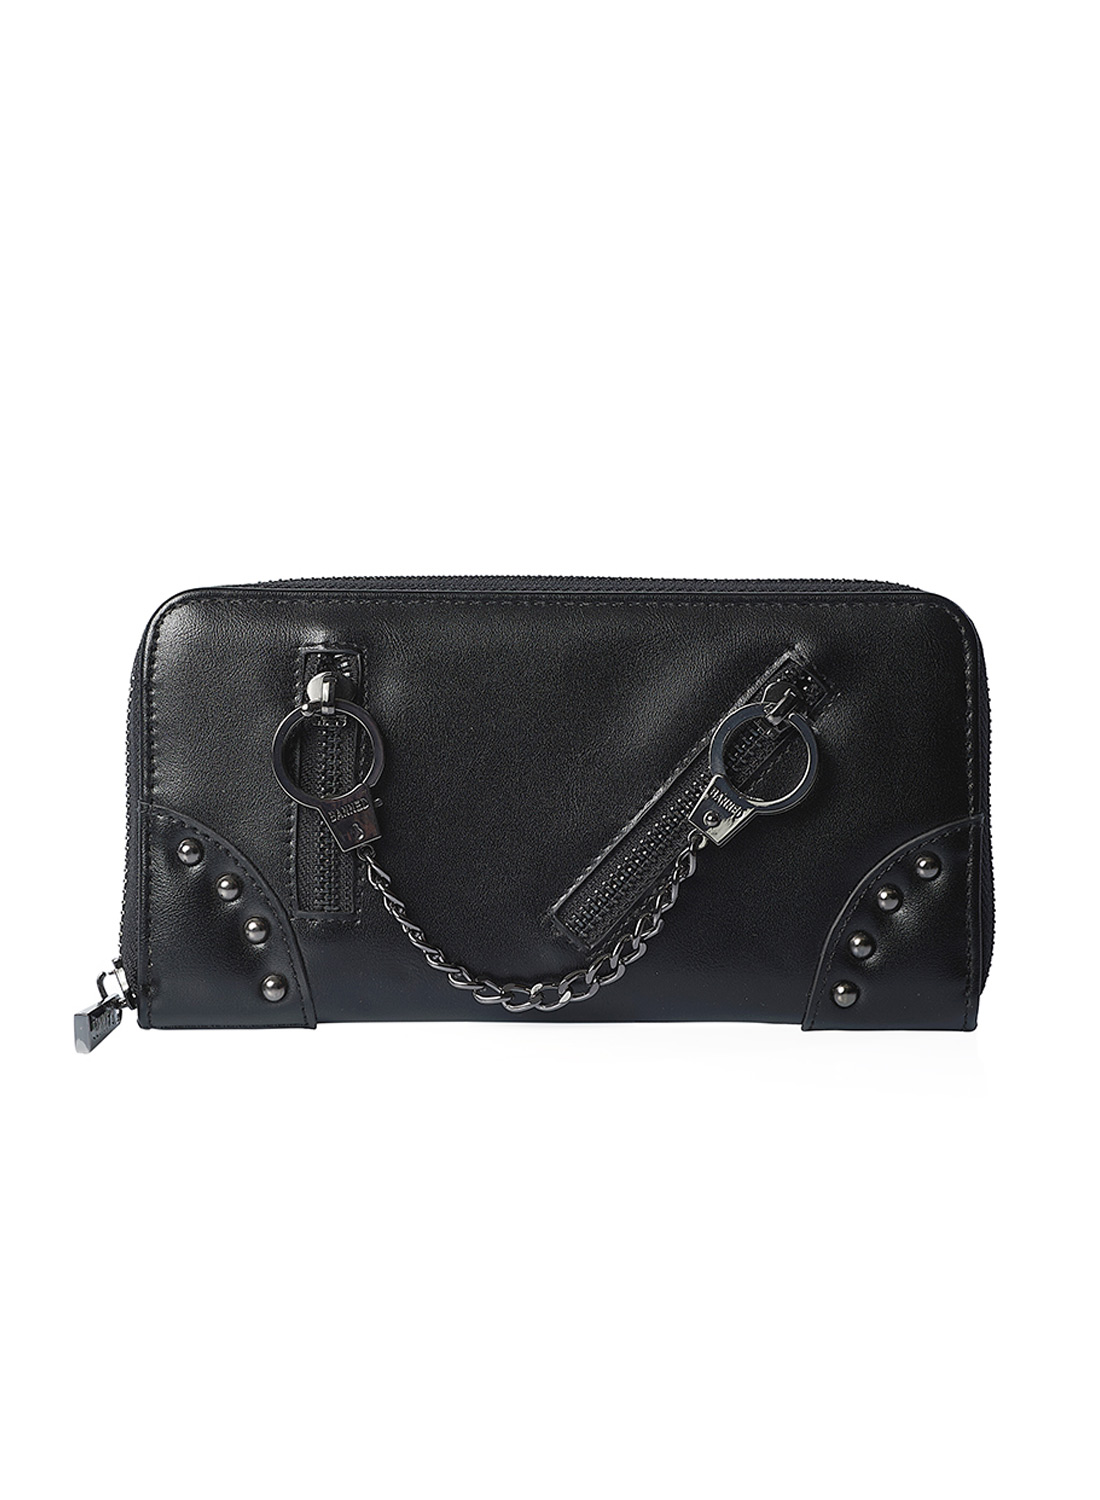 Chain And Handcuffs Wallet